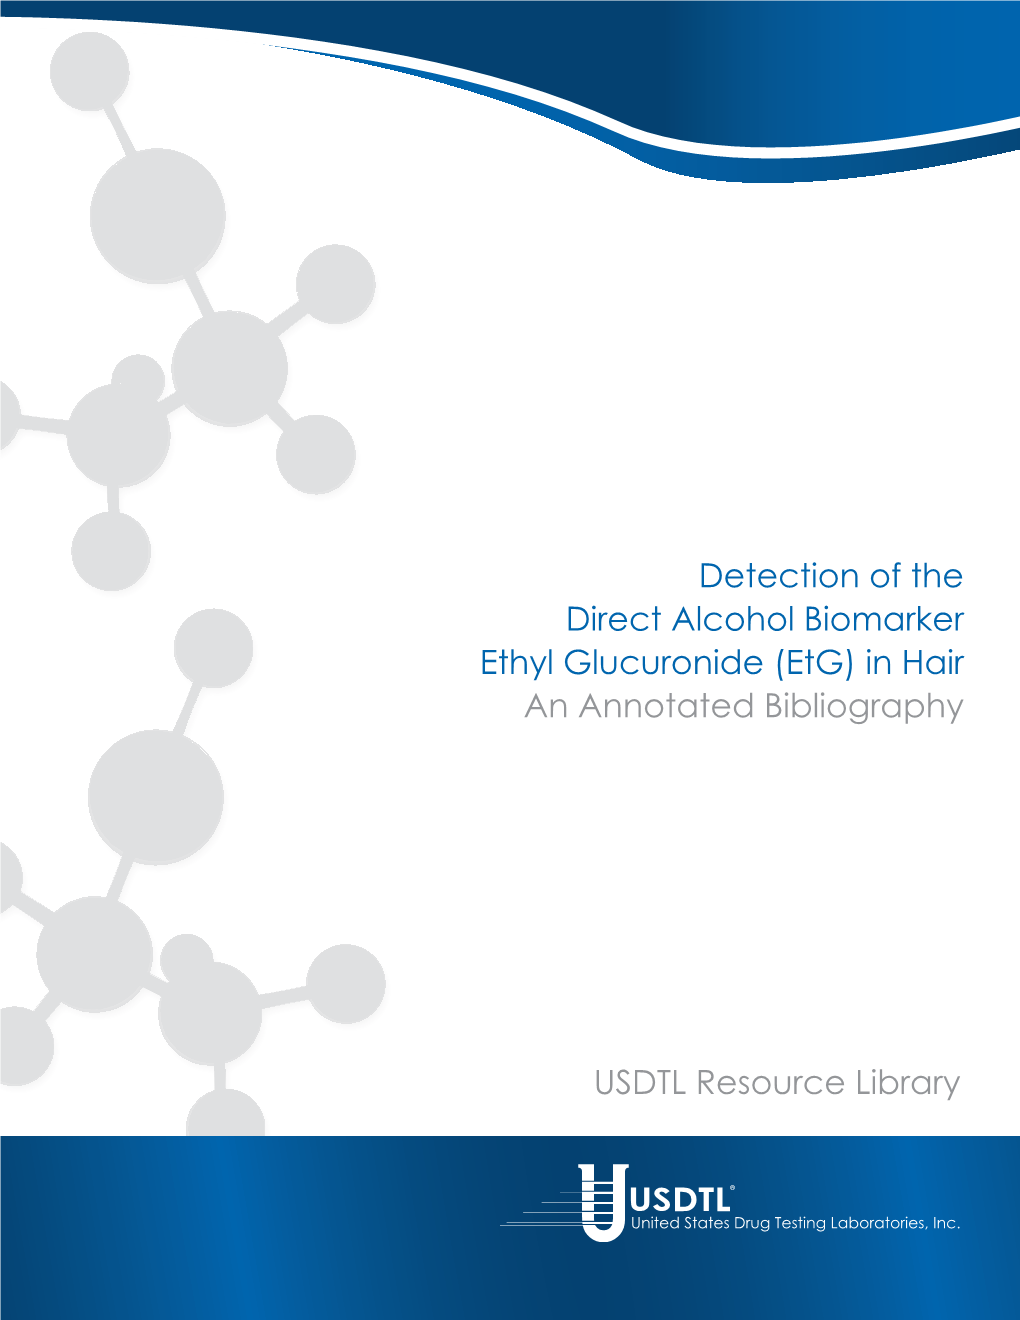 Detection of the Direct Alcohol Biomarker Ethyl Glucuronide (Etg) in Hair an Annotated Bibliography USDTL Resource Library